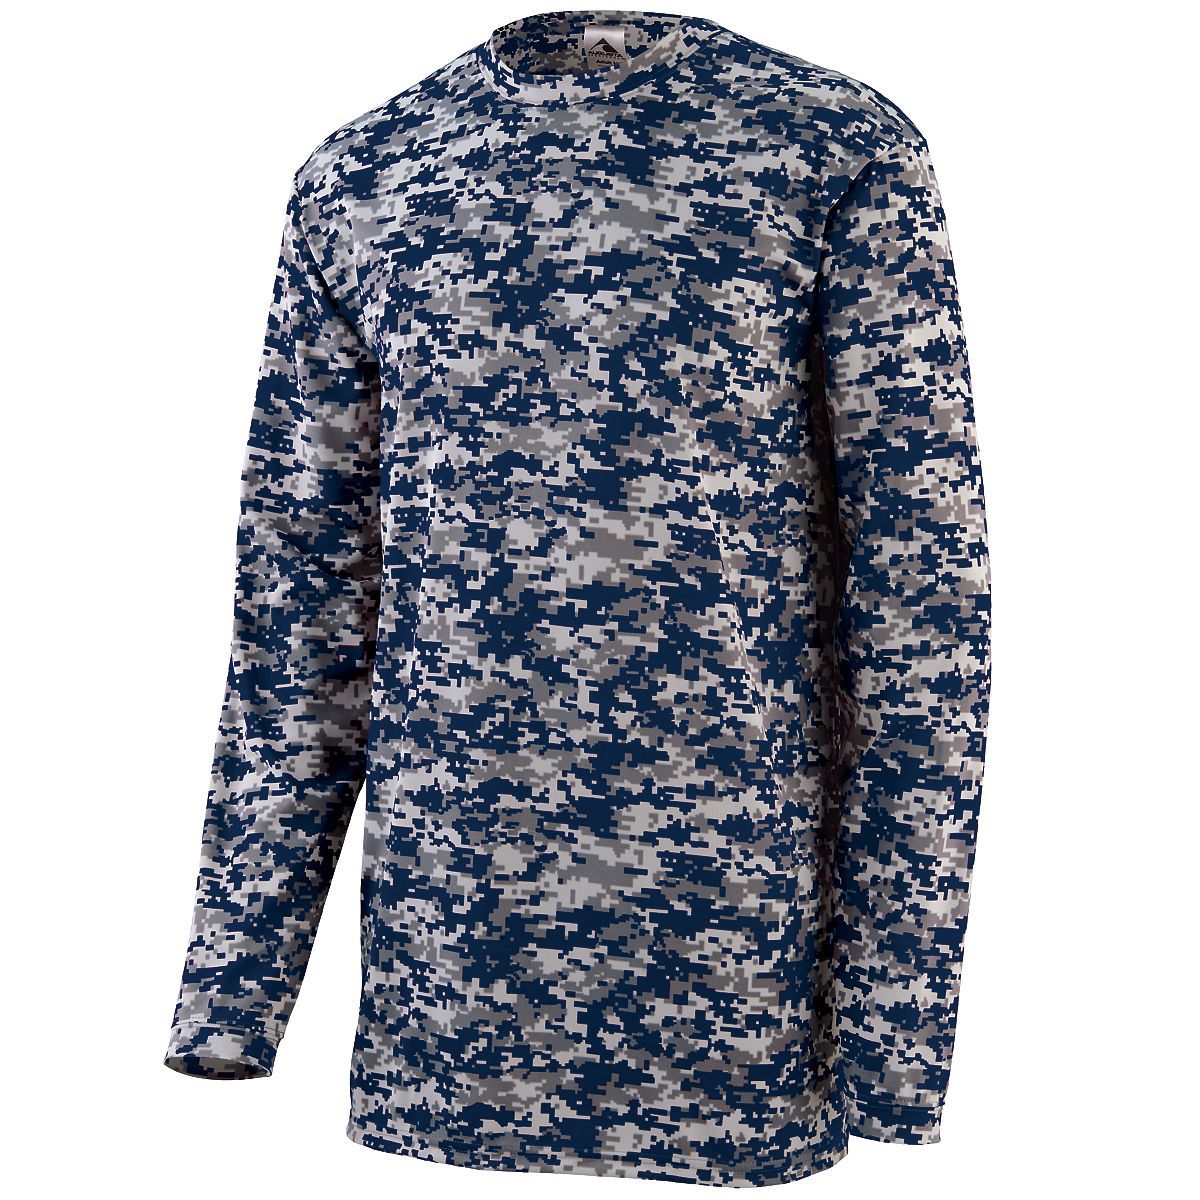 Augusta Sportswear Youth Digi Camo Wicking Long Sleeve T-Shirt in Navy Digi  -Part of the Youth, Youth-Tee-Shirt, T-Shirts, Augusta-Products, Shirts product lines at KanaleyCreations.com